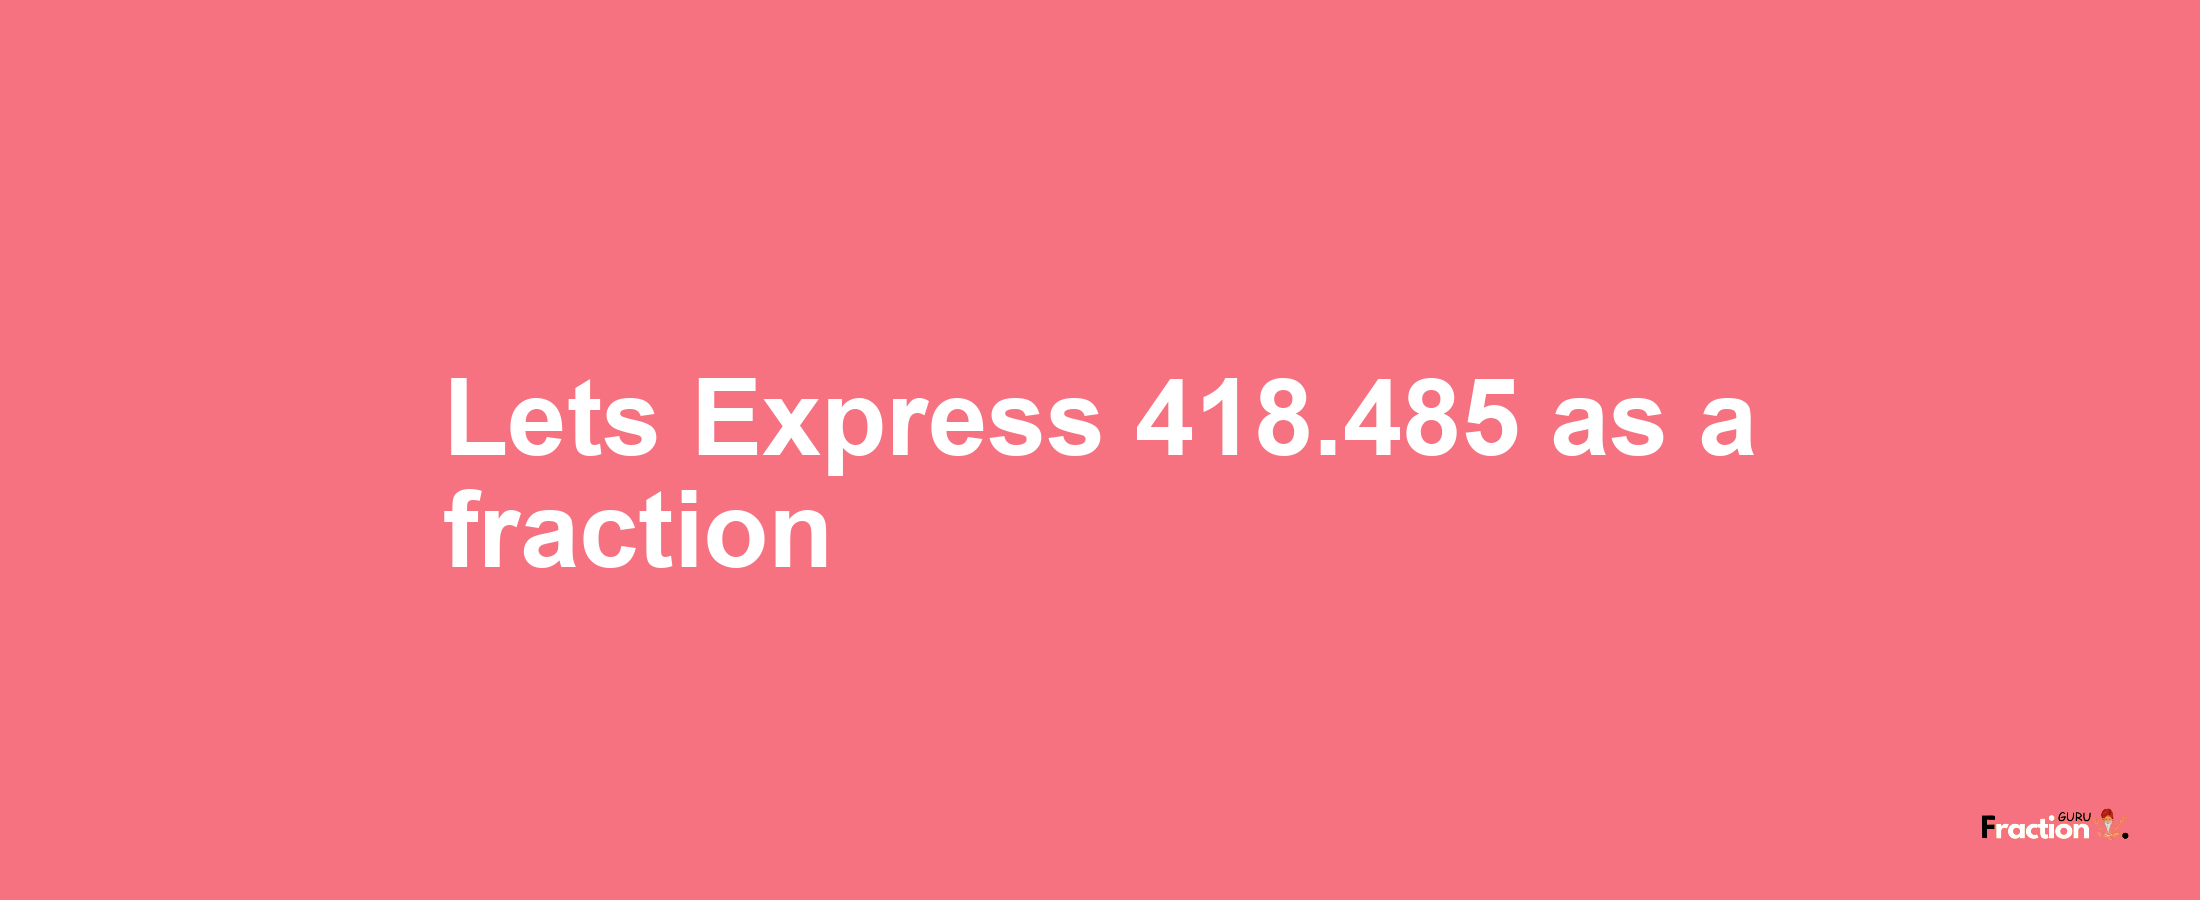 Lets Express 418.485 as afraction